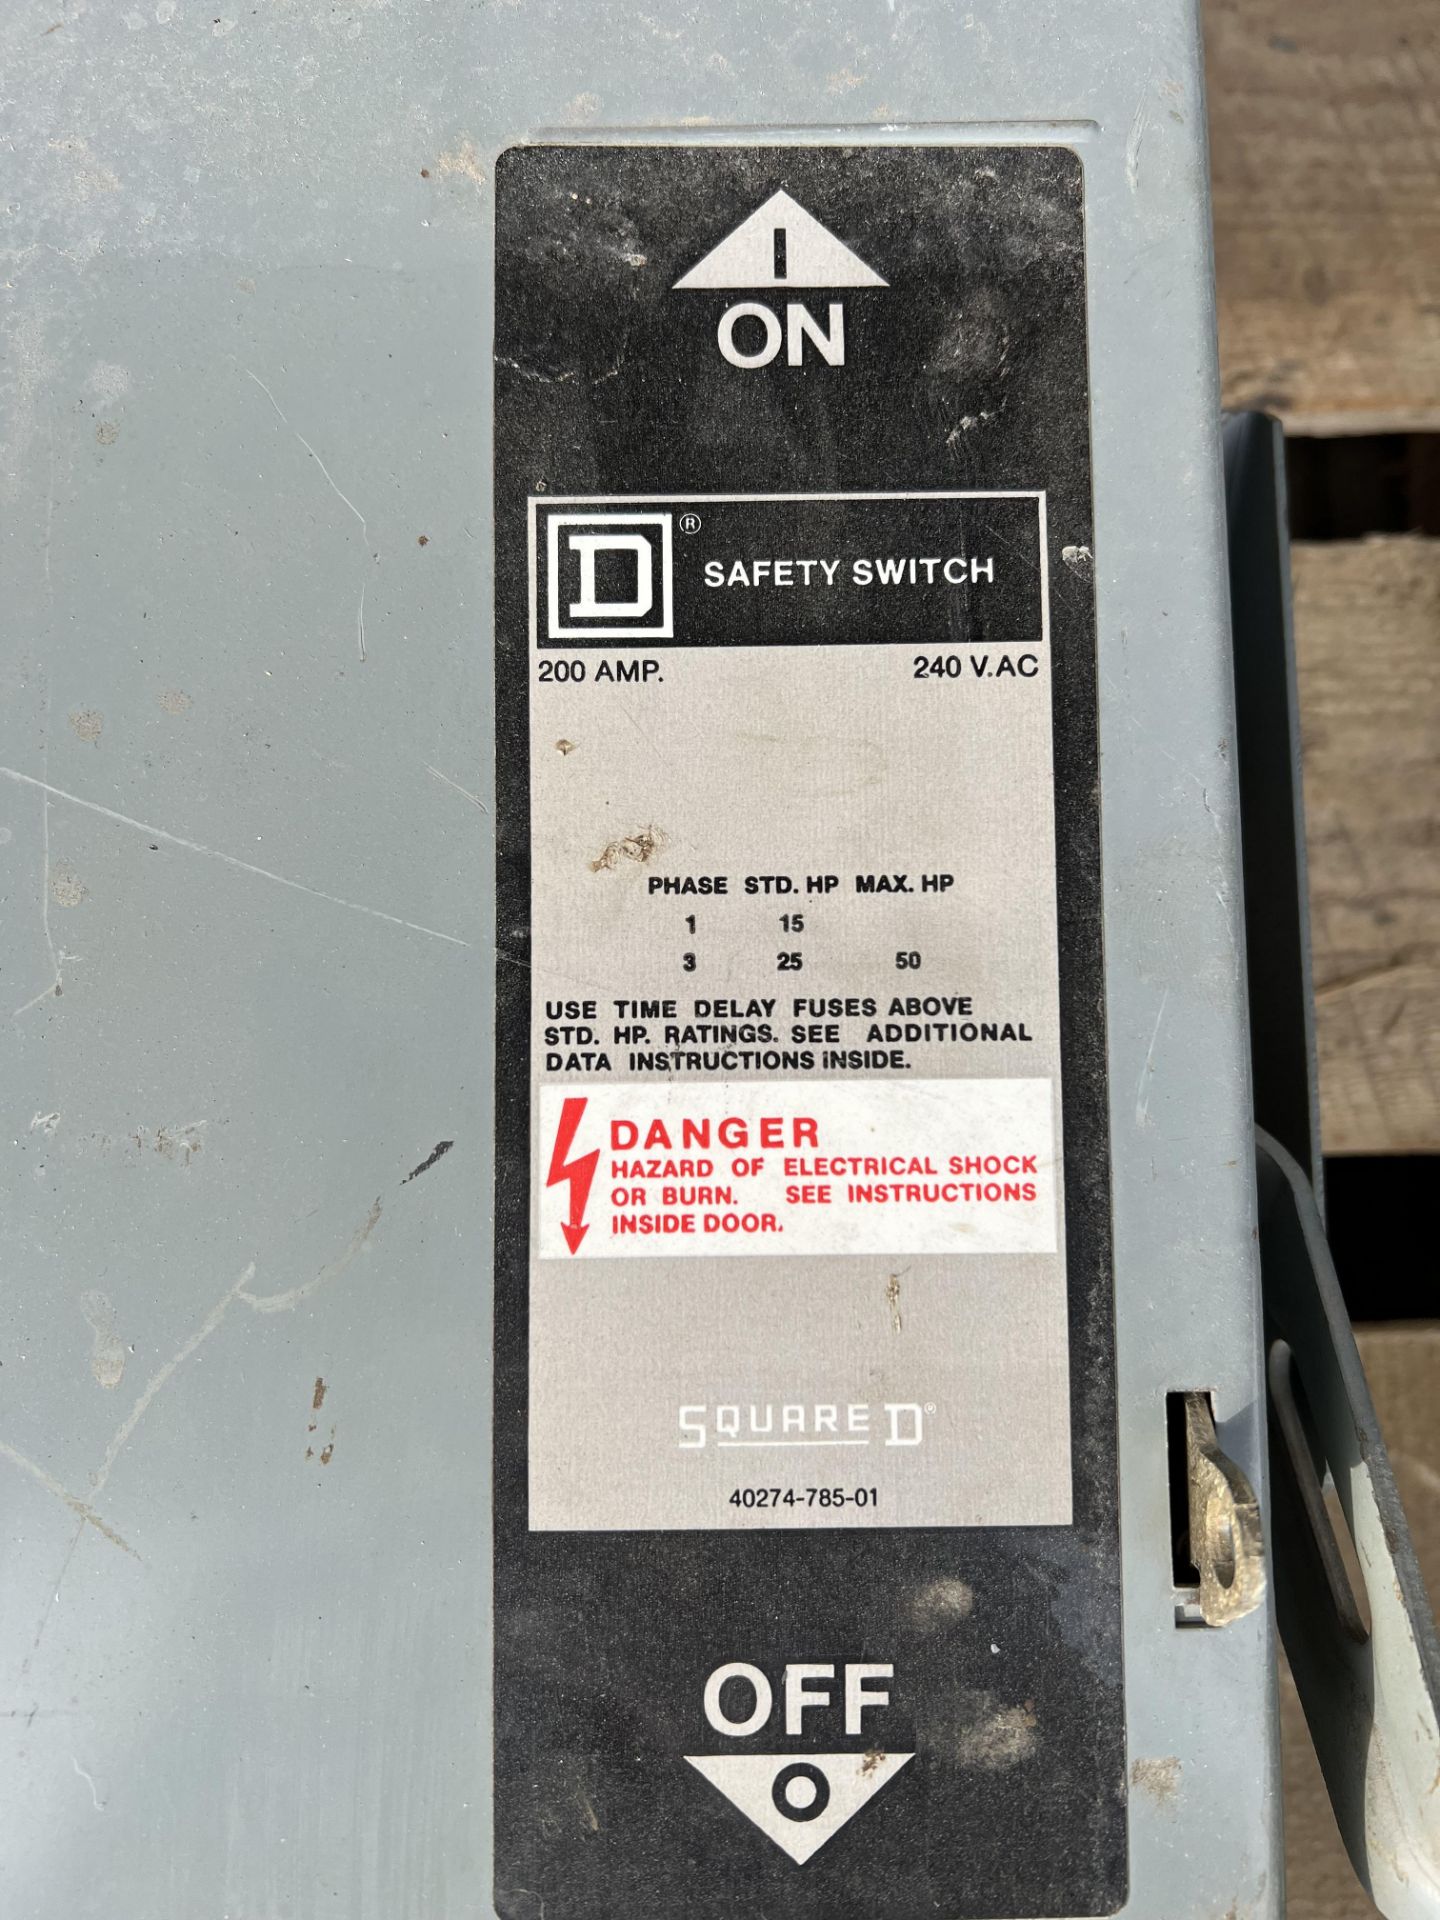 Square D 200 Amp Safety Switch - Image 2 of 2